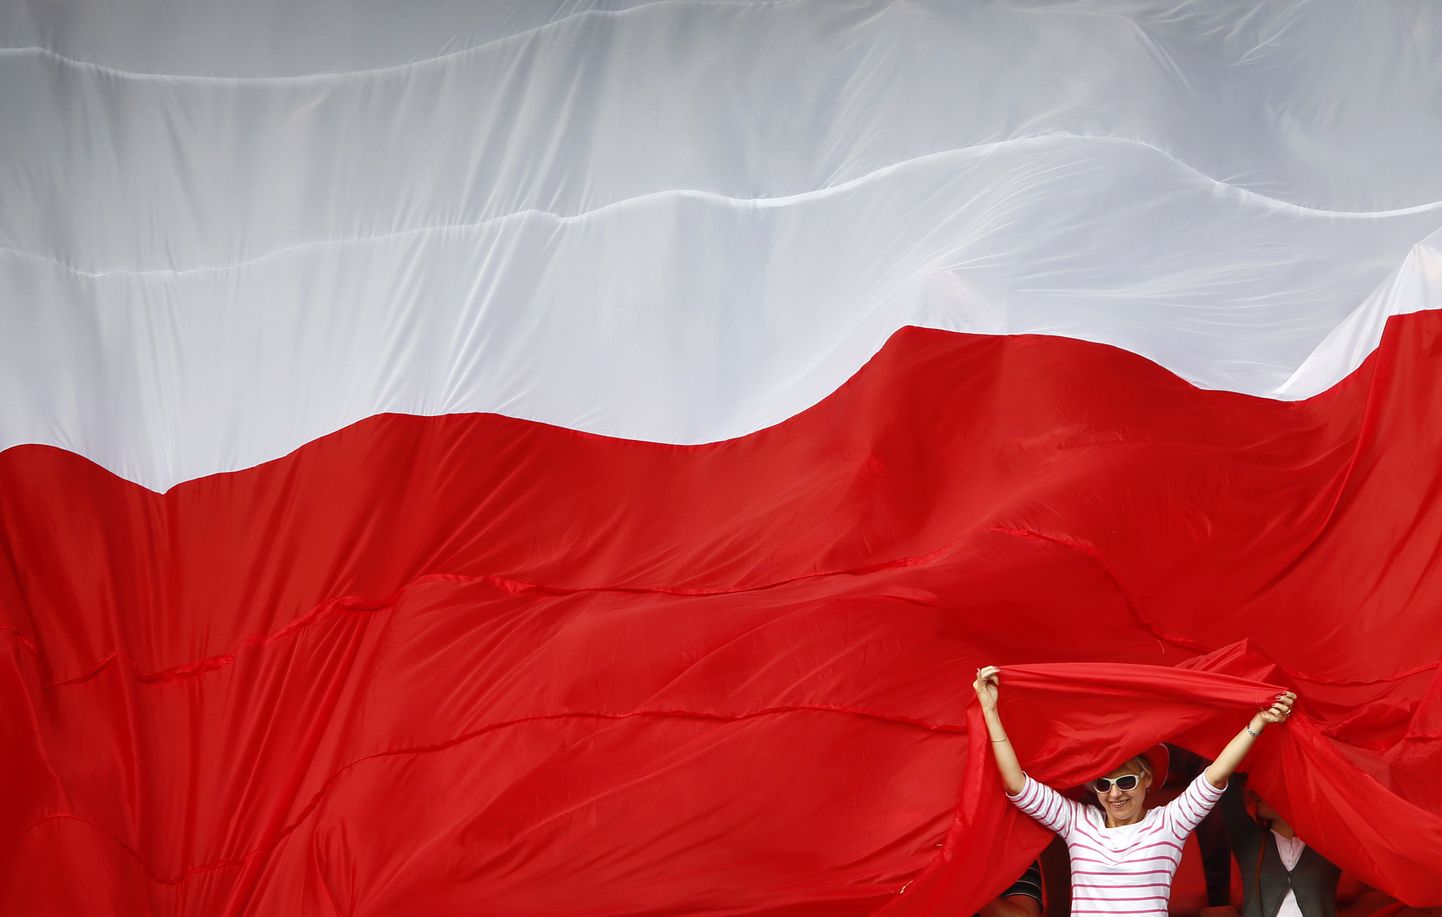 Supporters of Poland's national soccer team are seen under a large Polish flag as they wait for the start of a practice session one day after their Euro 2012 opening soccer match in Warsaw June 9, 2012.  REUTERS/Kai Pfaffenbach (POLAND  - Tags: SPORT SOCCER)